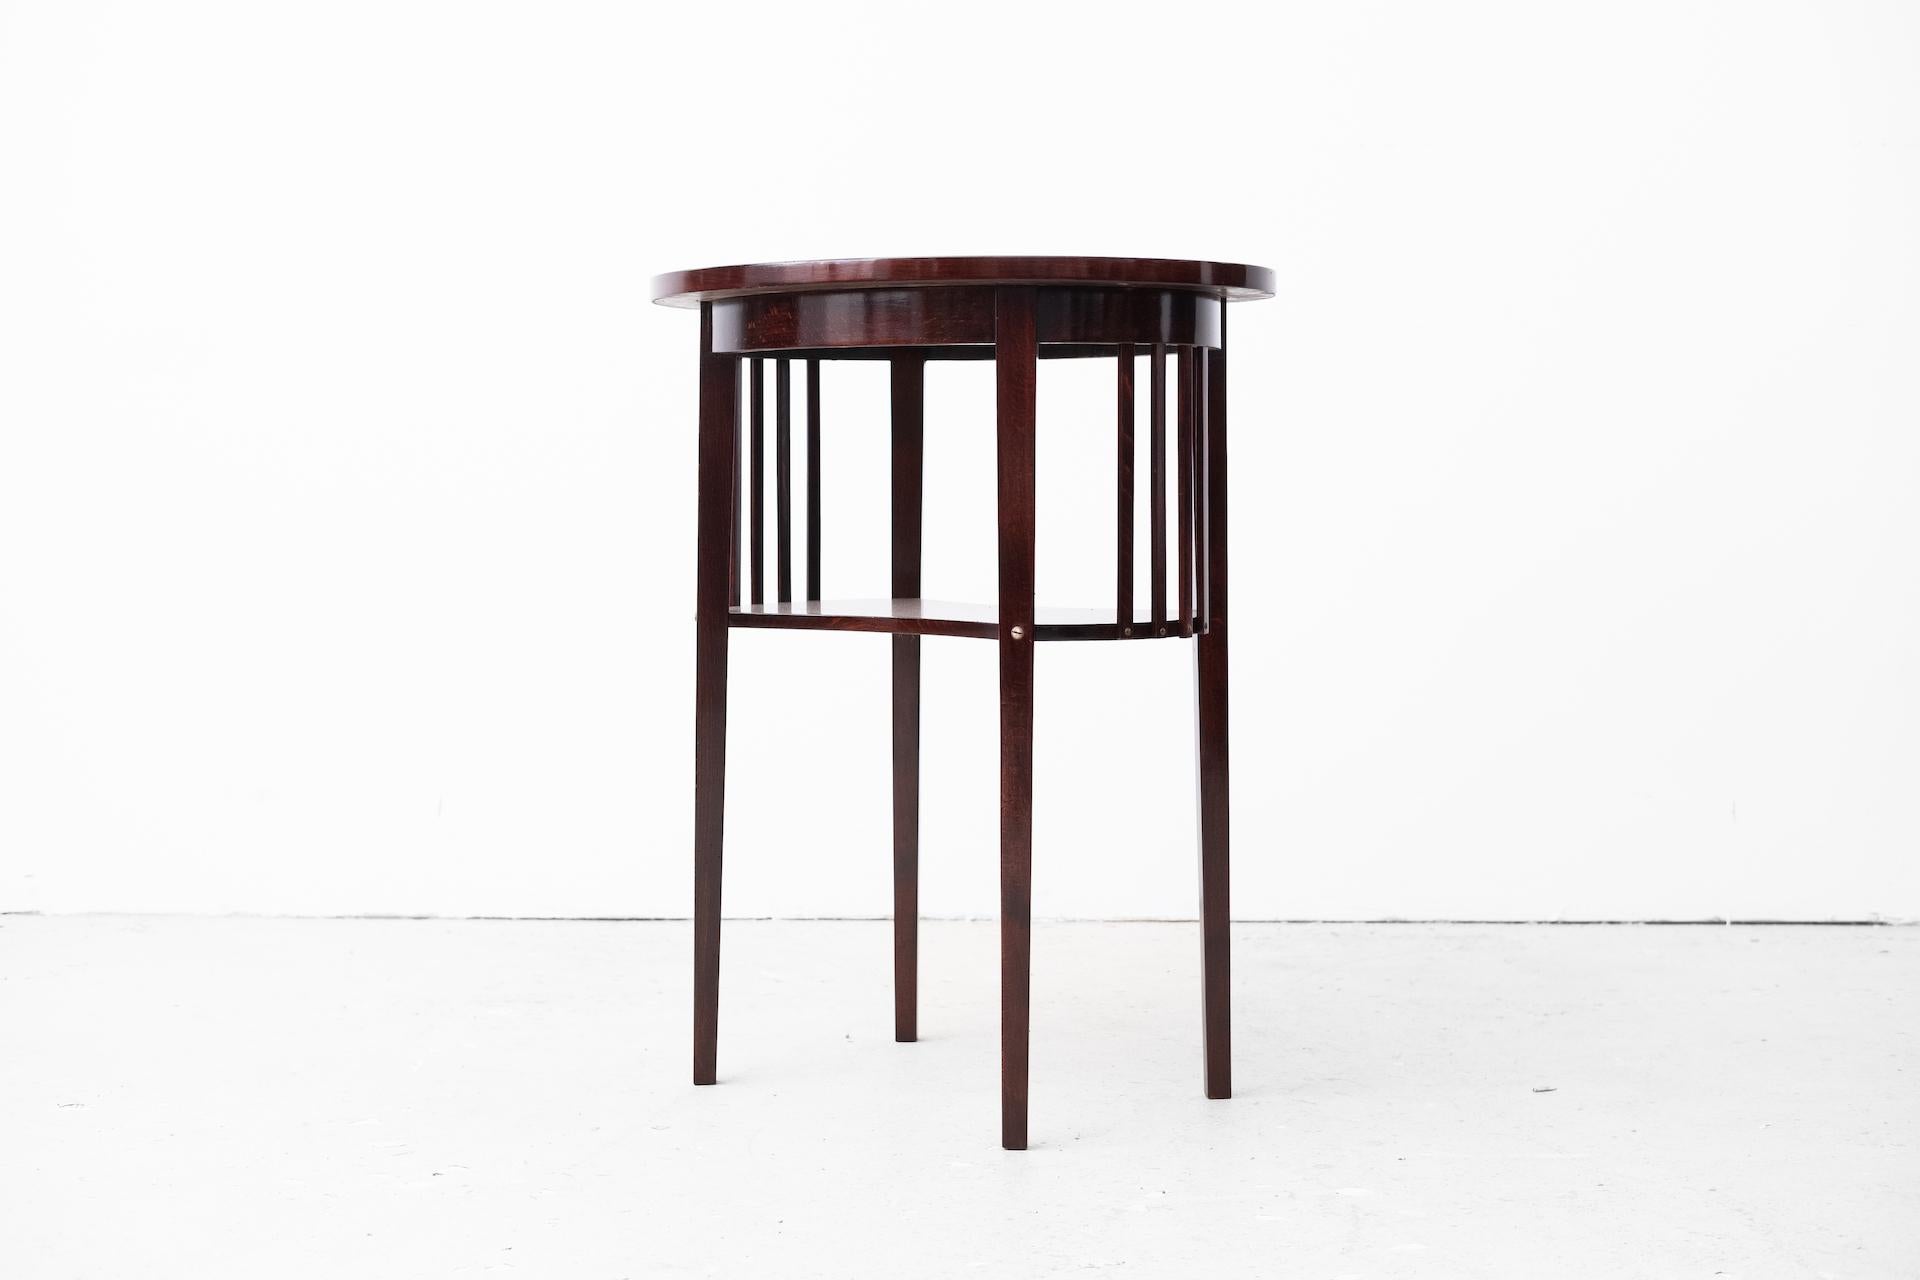 Vienna Secession Art Nouveau Sidetable, Model 9208 by Marcel Kammerer for Thonet (Vienna, 1904)